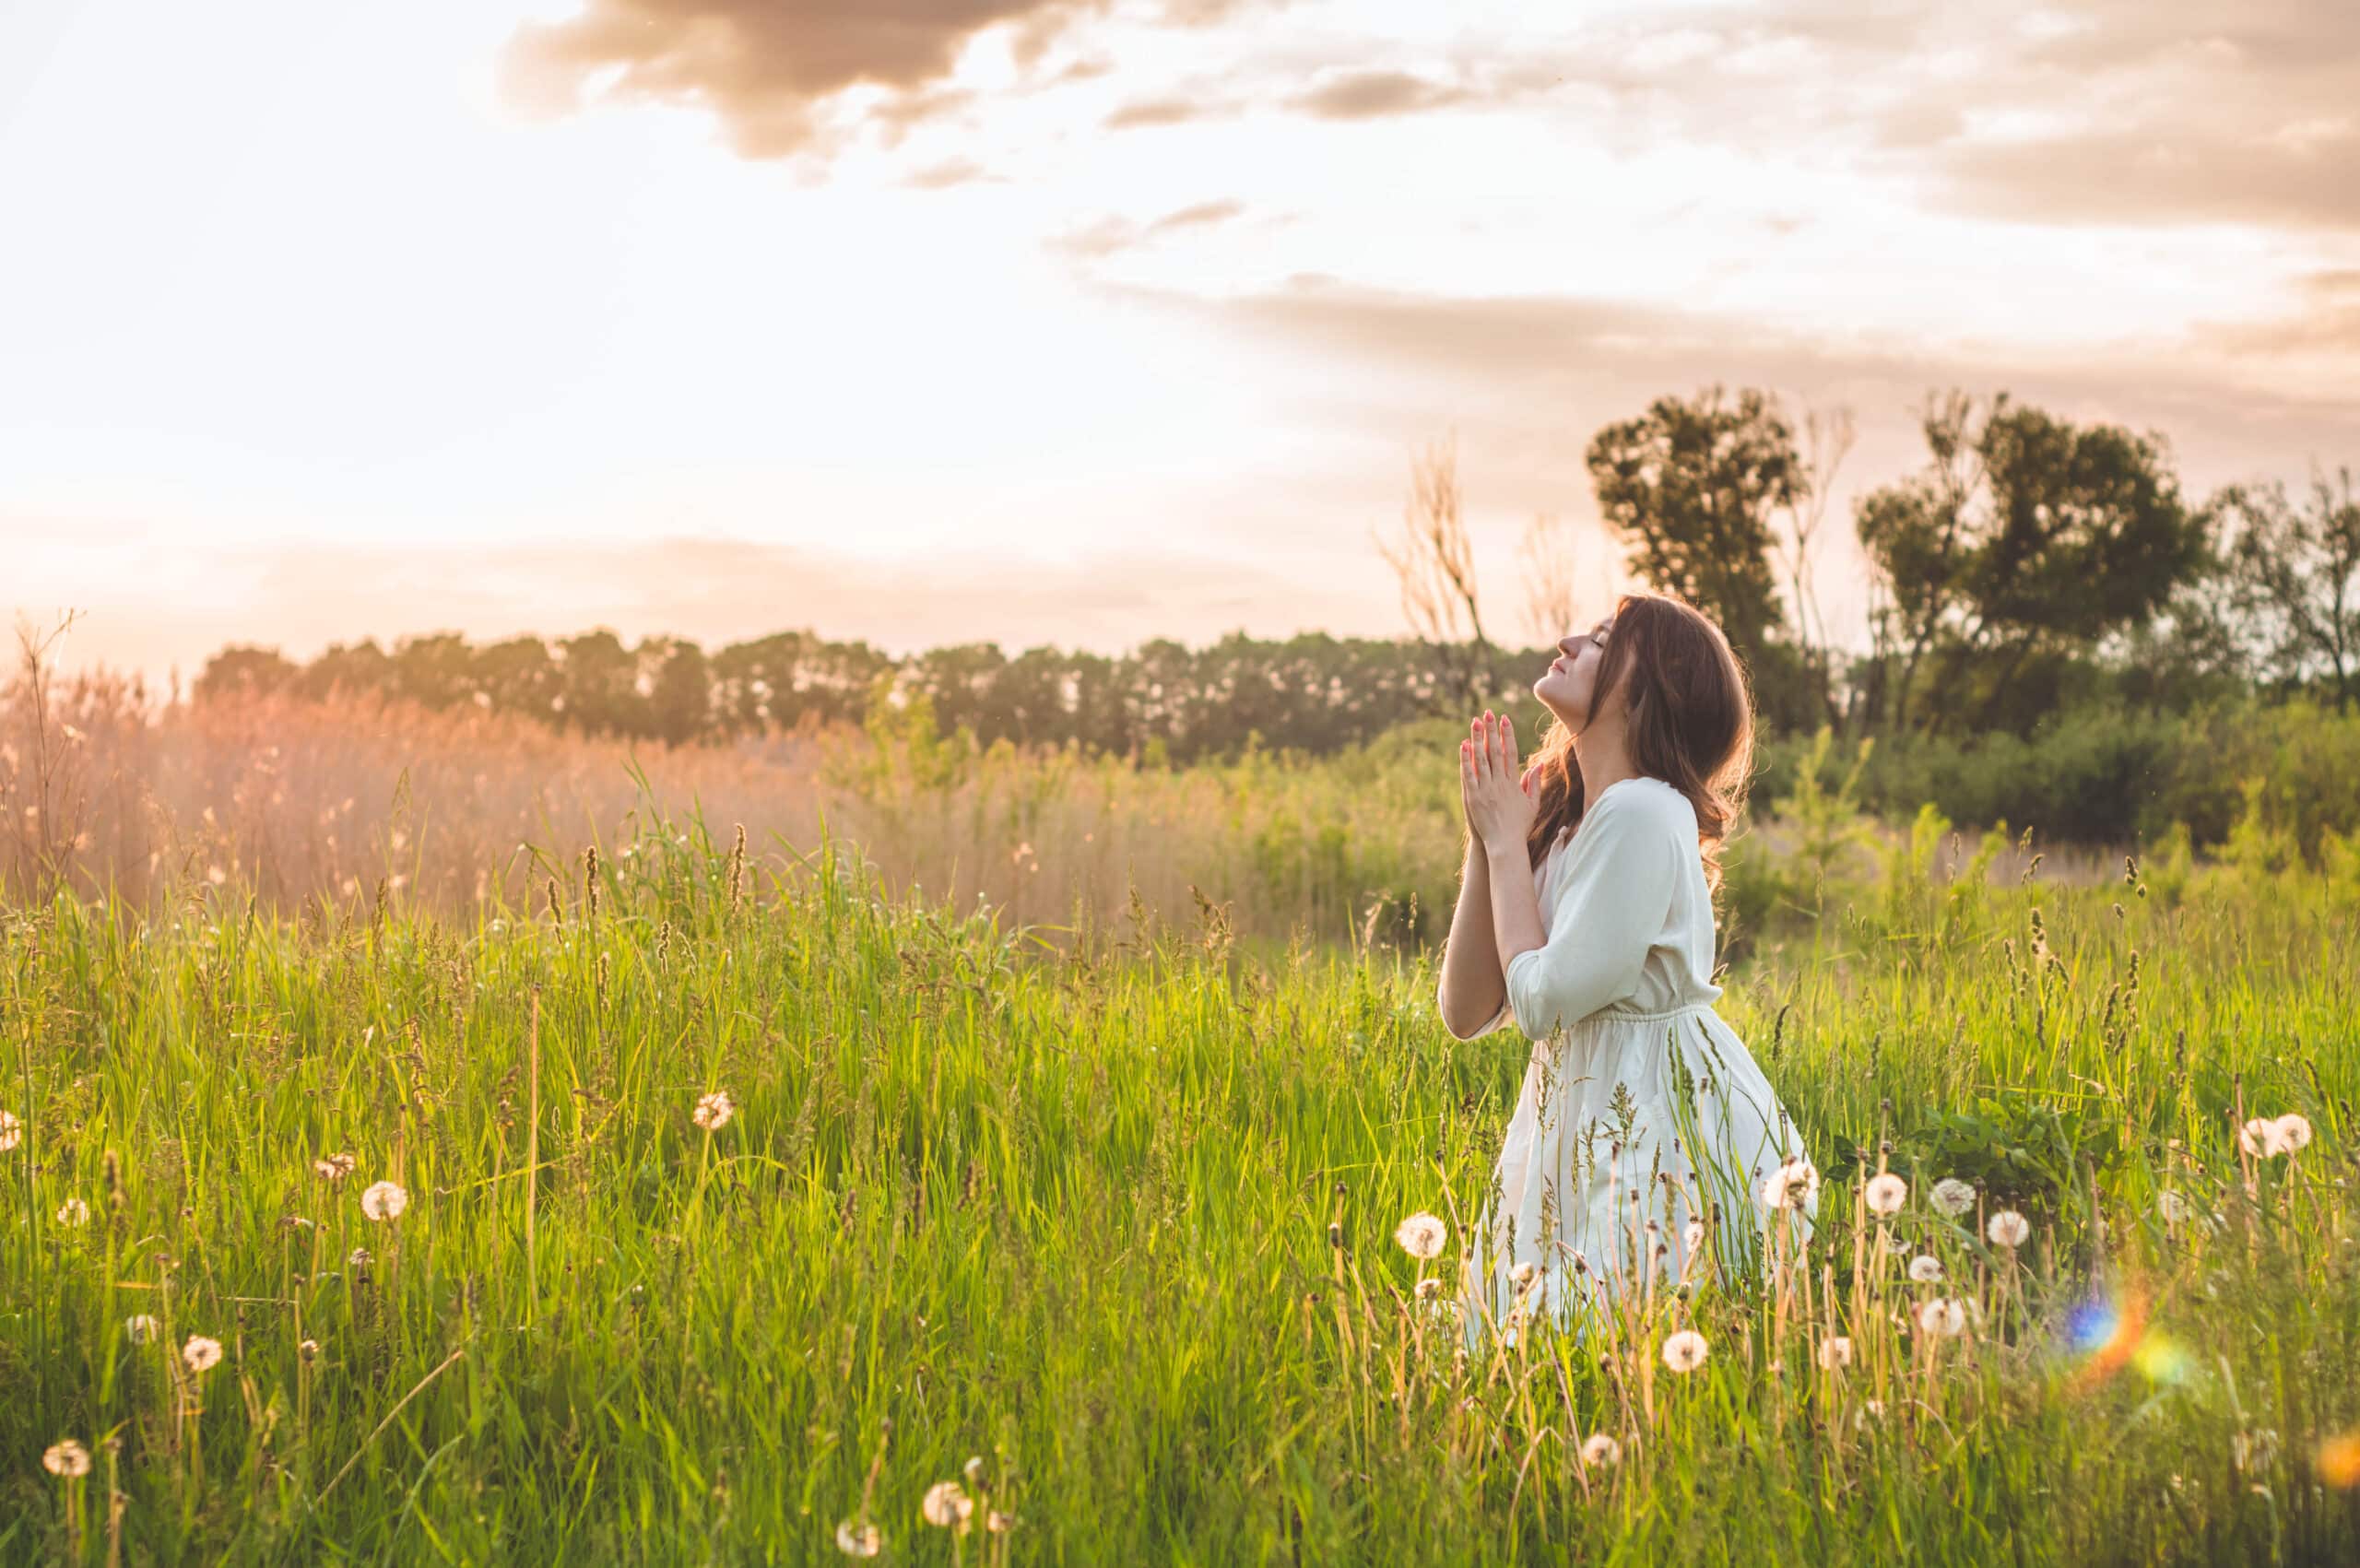 Girl closed her eyes, praying in a field during beautiful sunset